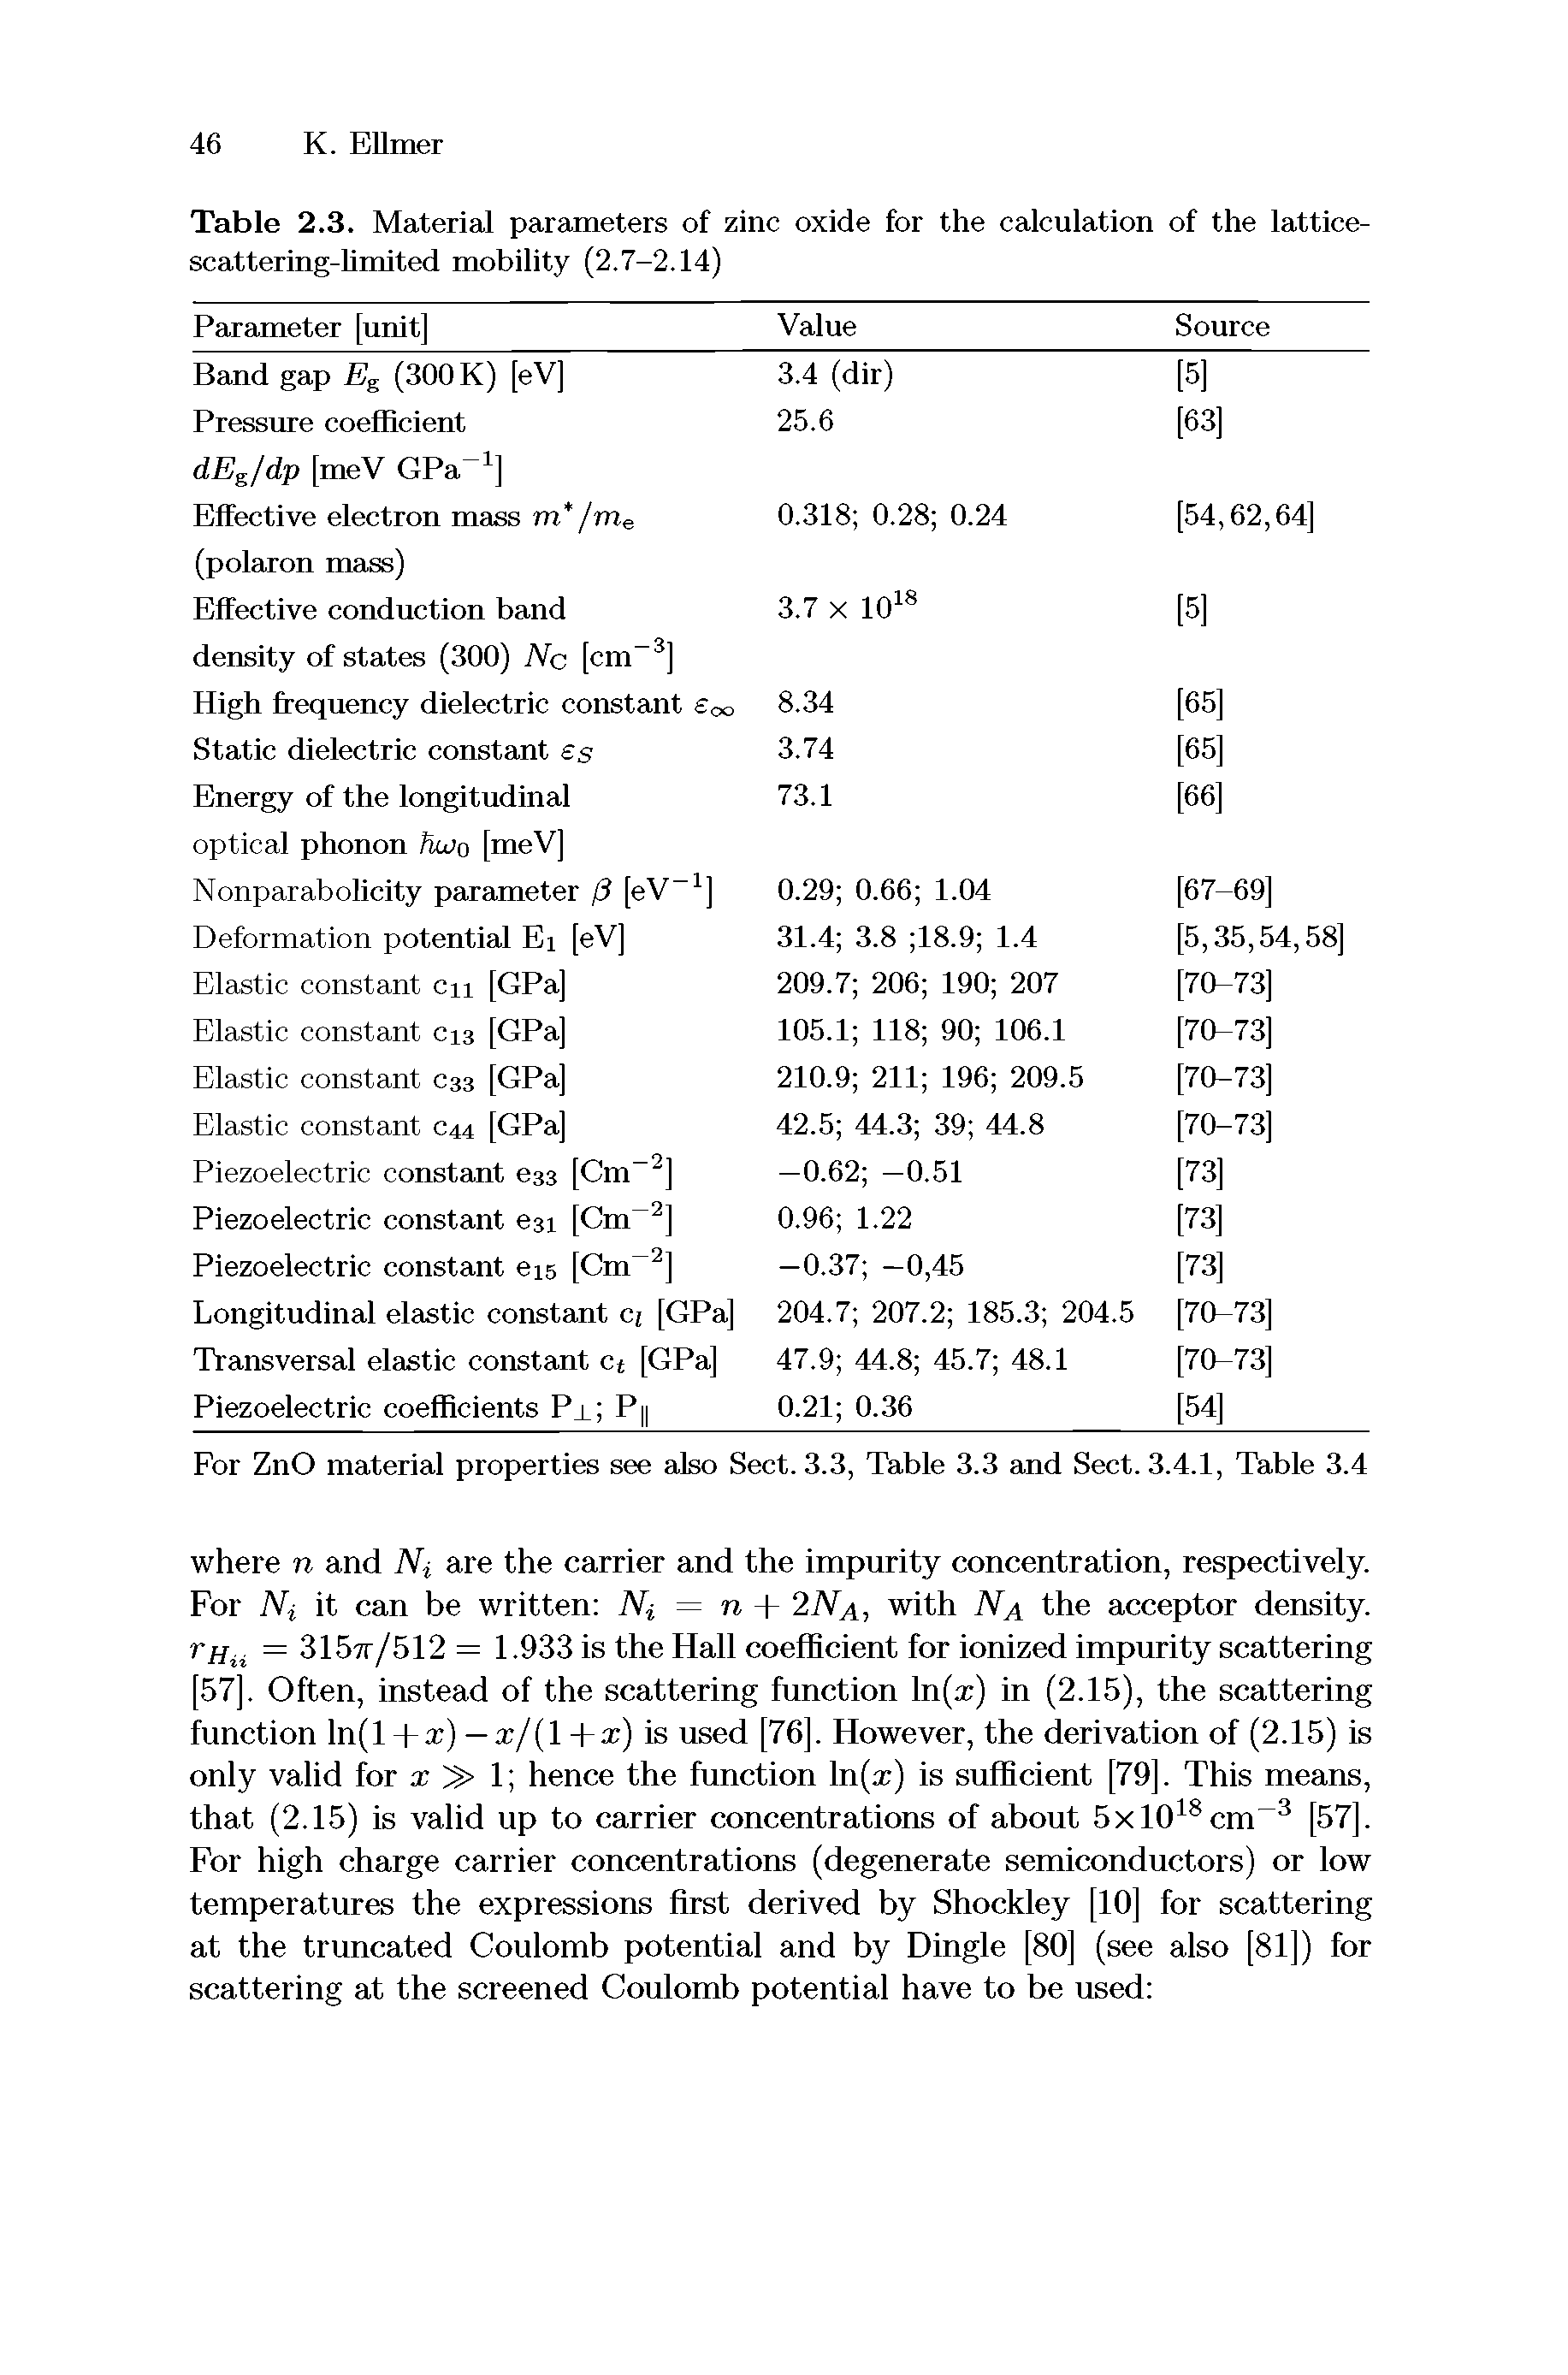 Table 2.3. Material parameters of zinc oxide for the calculation of the lattice-scattering-limited mobility (2.7-2.14)...